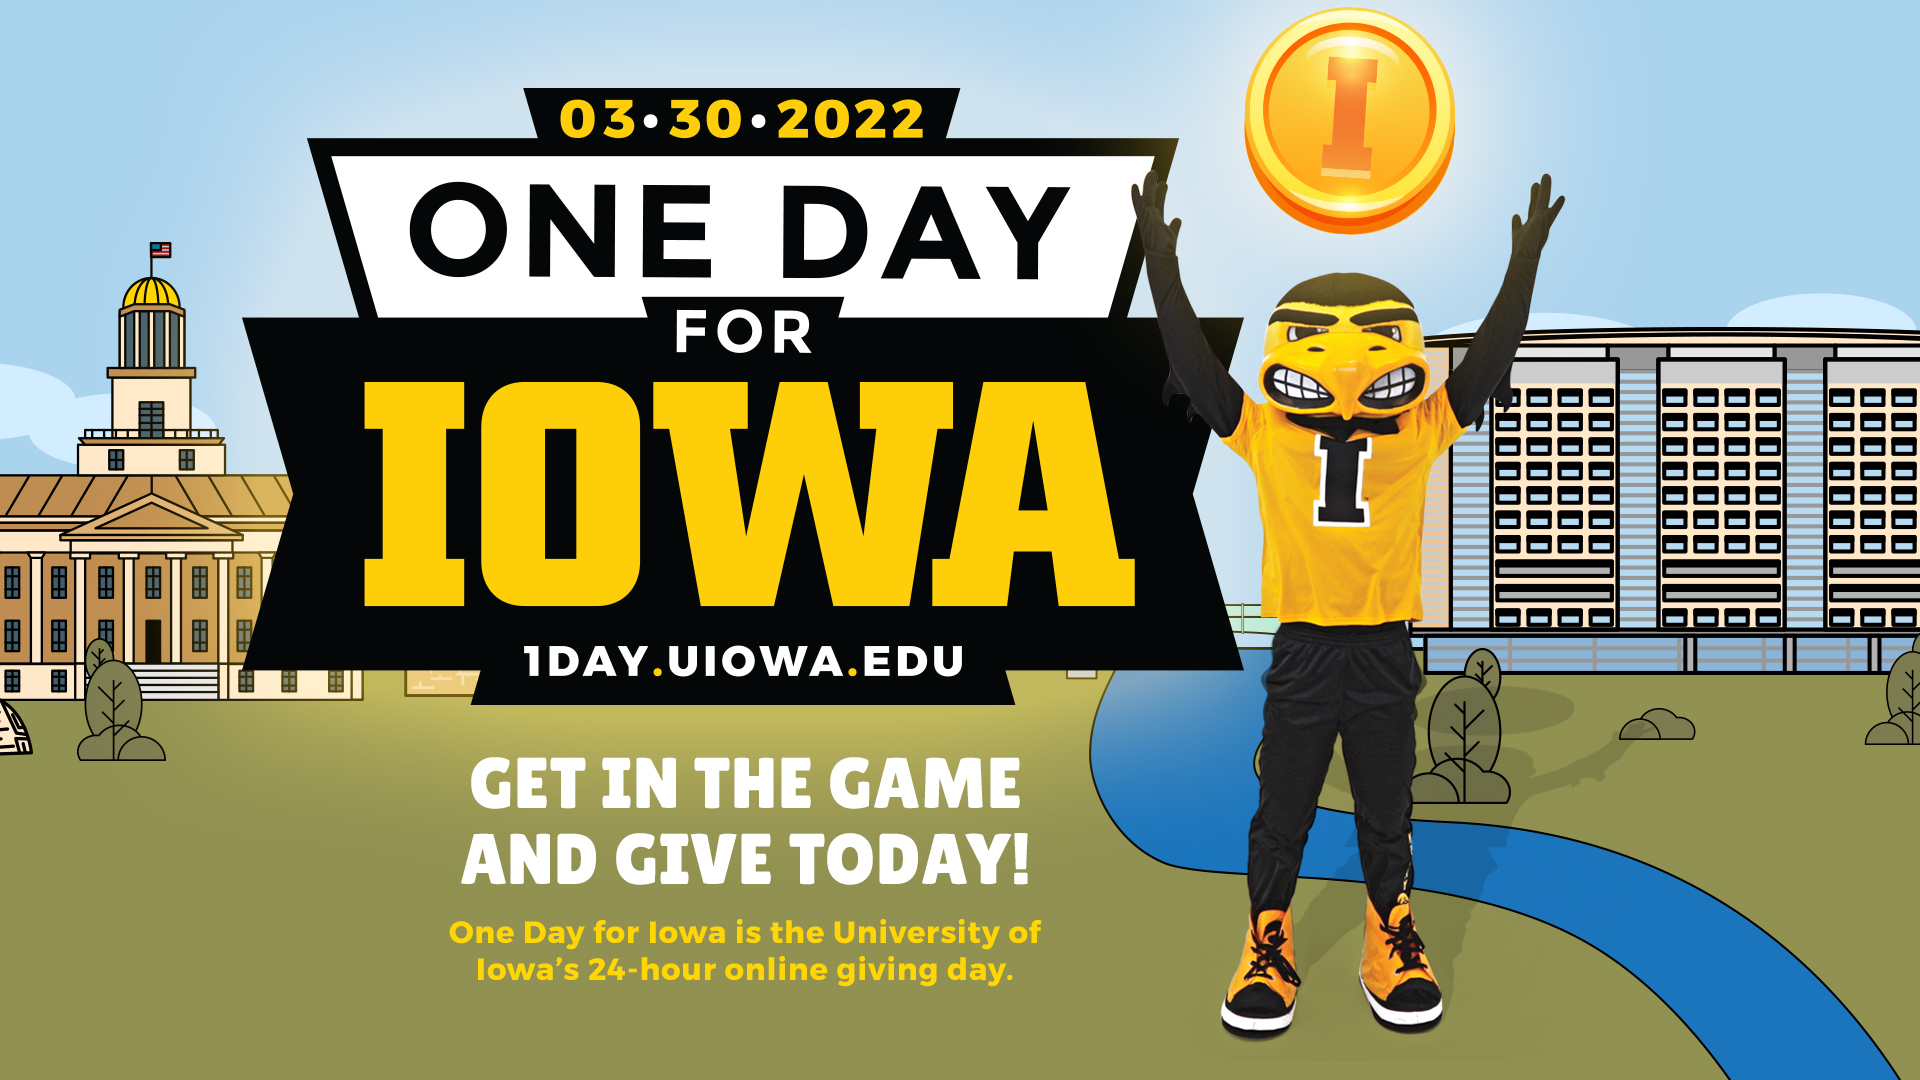 One Day for Iowa – March 30, 2022